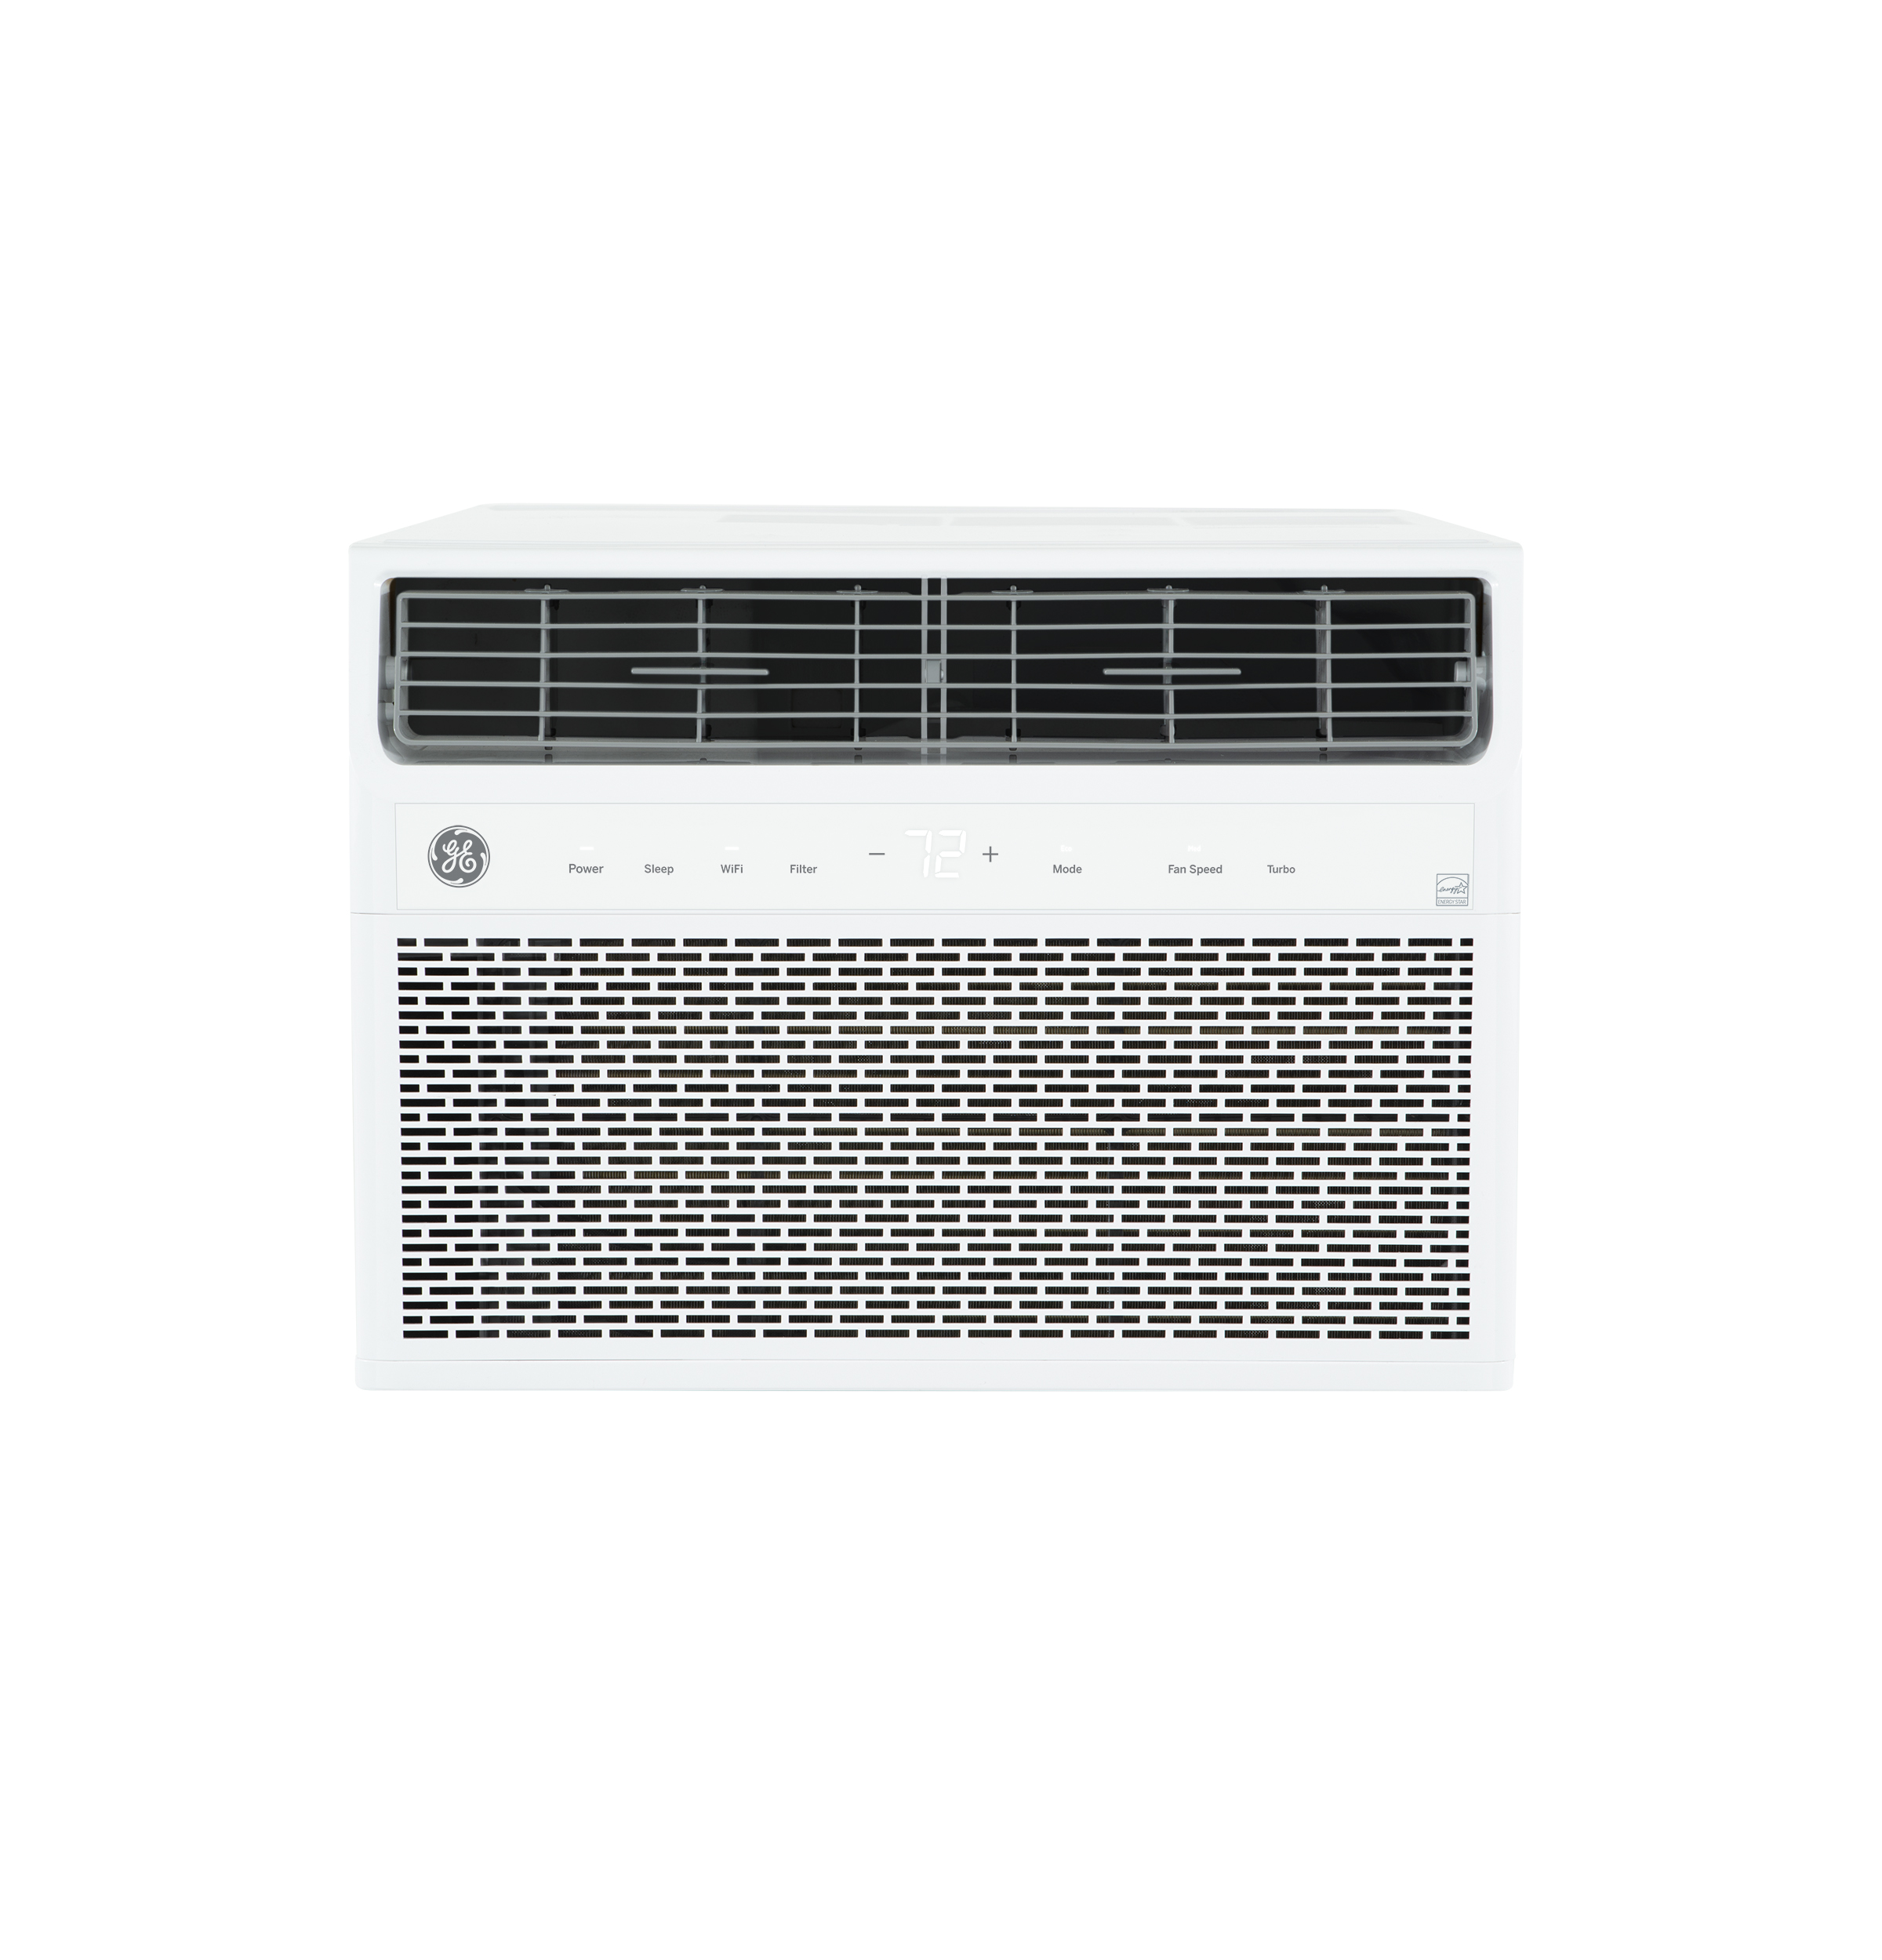 GE® ENERGY STAR® 14,000 BTU Smart Electronic Window Air Conditioner for Large Rooms up to 700 sq. ft.